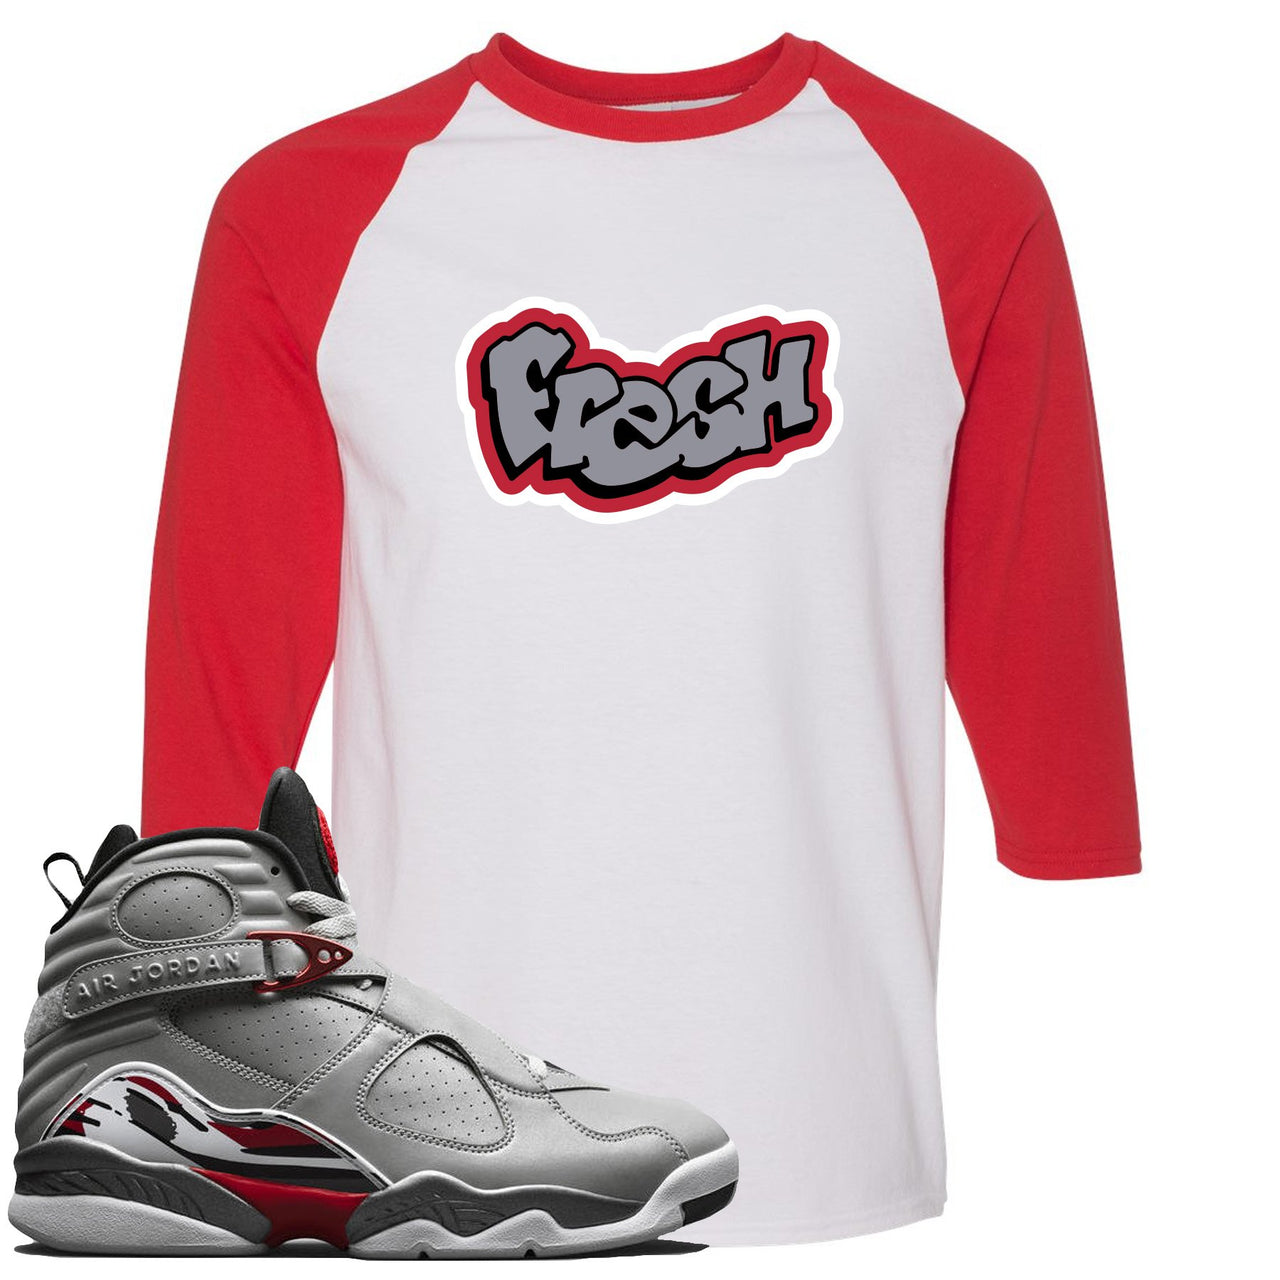 Reflections of a Champion 8s Raglan T Shirt | Fresh Logo, White and Red